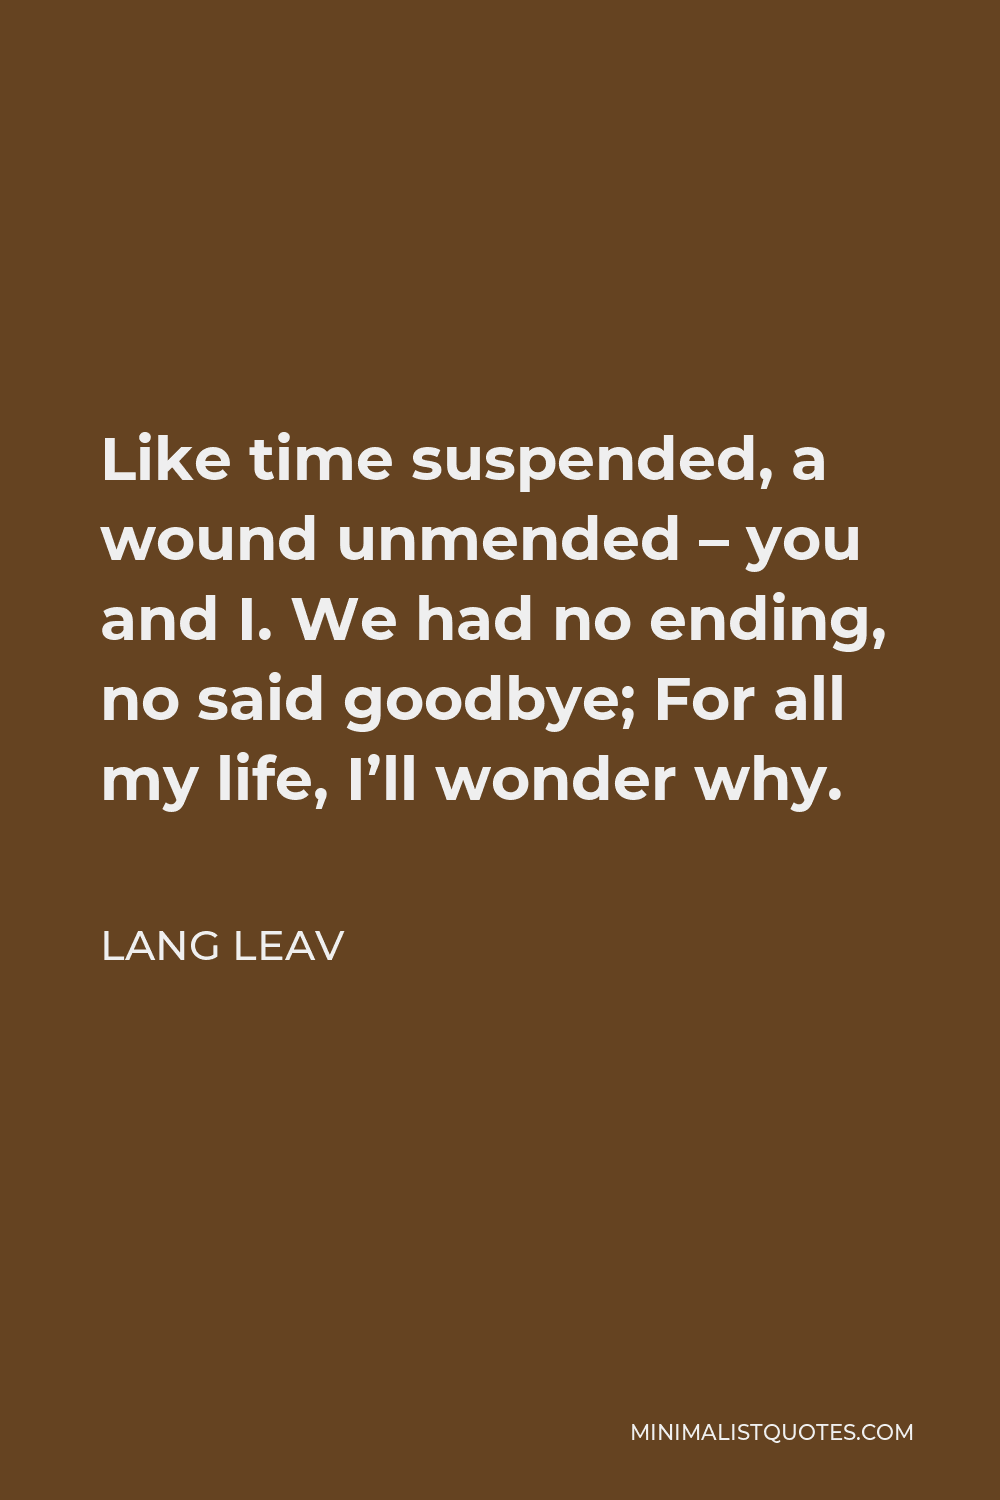 Lang Leav Quote - Like time suspended, a wound unmended – you and I. We had no ending, no said goodbye; For all my life, I’ll wonder why.